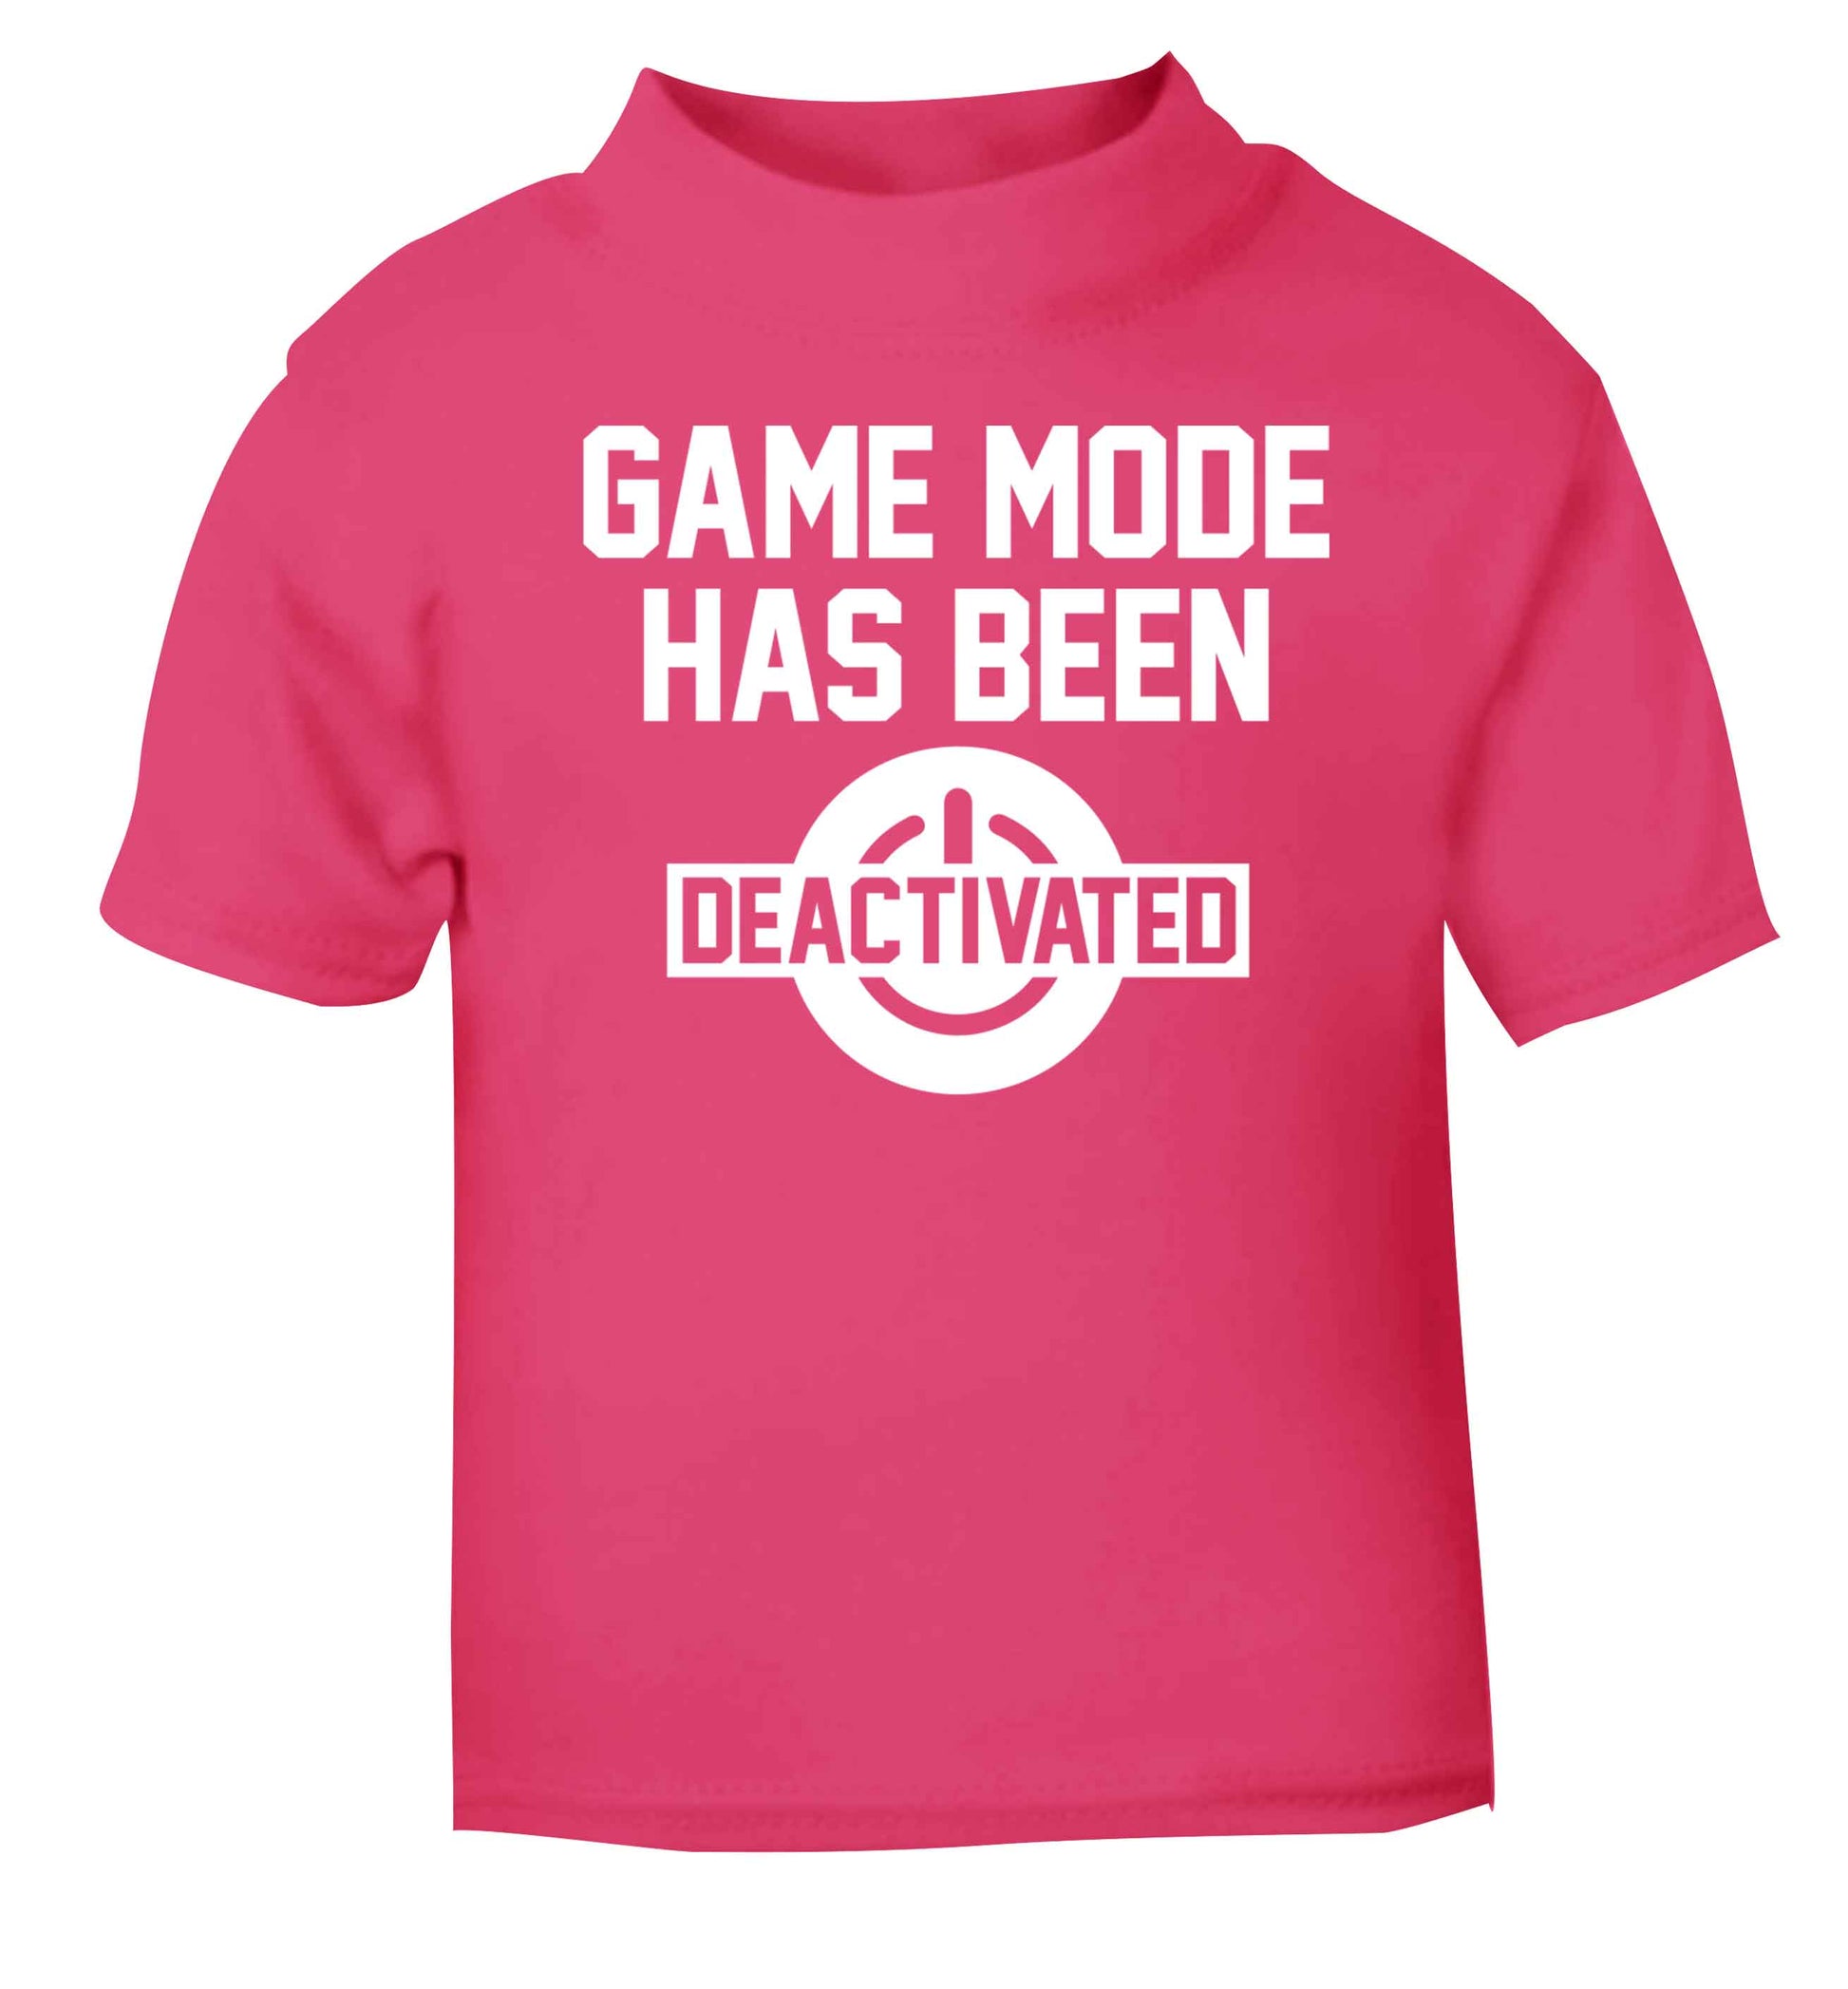 Game Mode Has Been Deactivated pink baby toddler Tshirt 2 Years